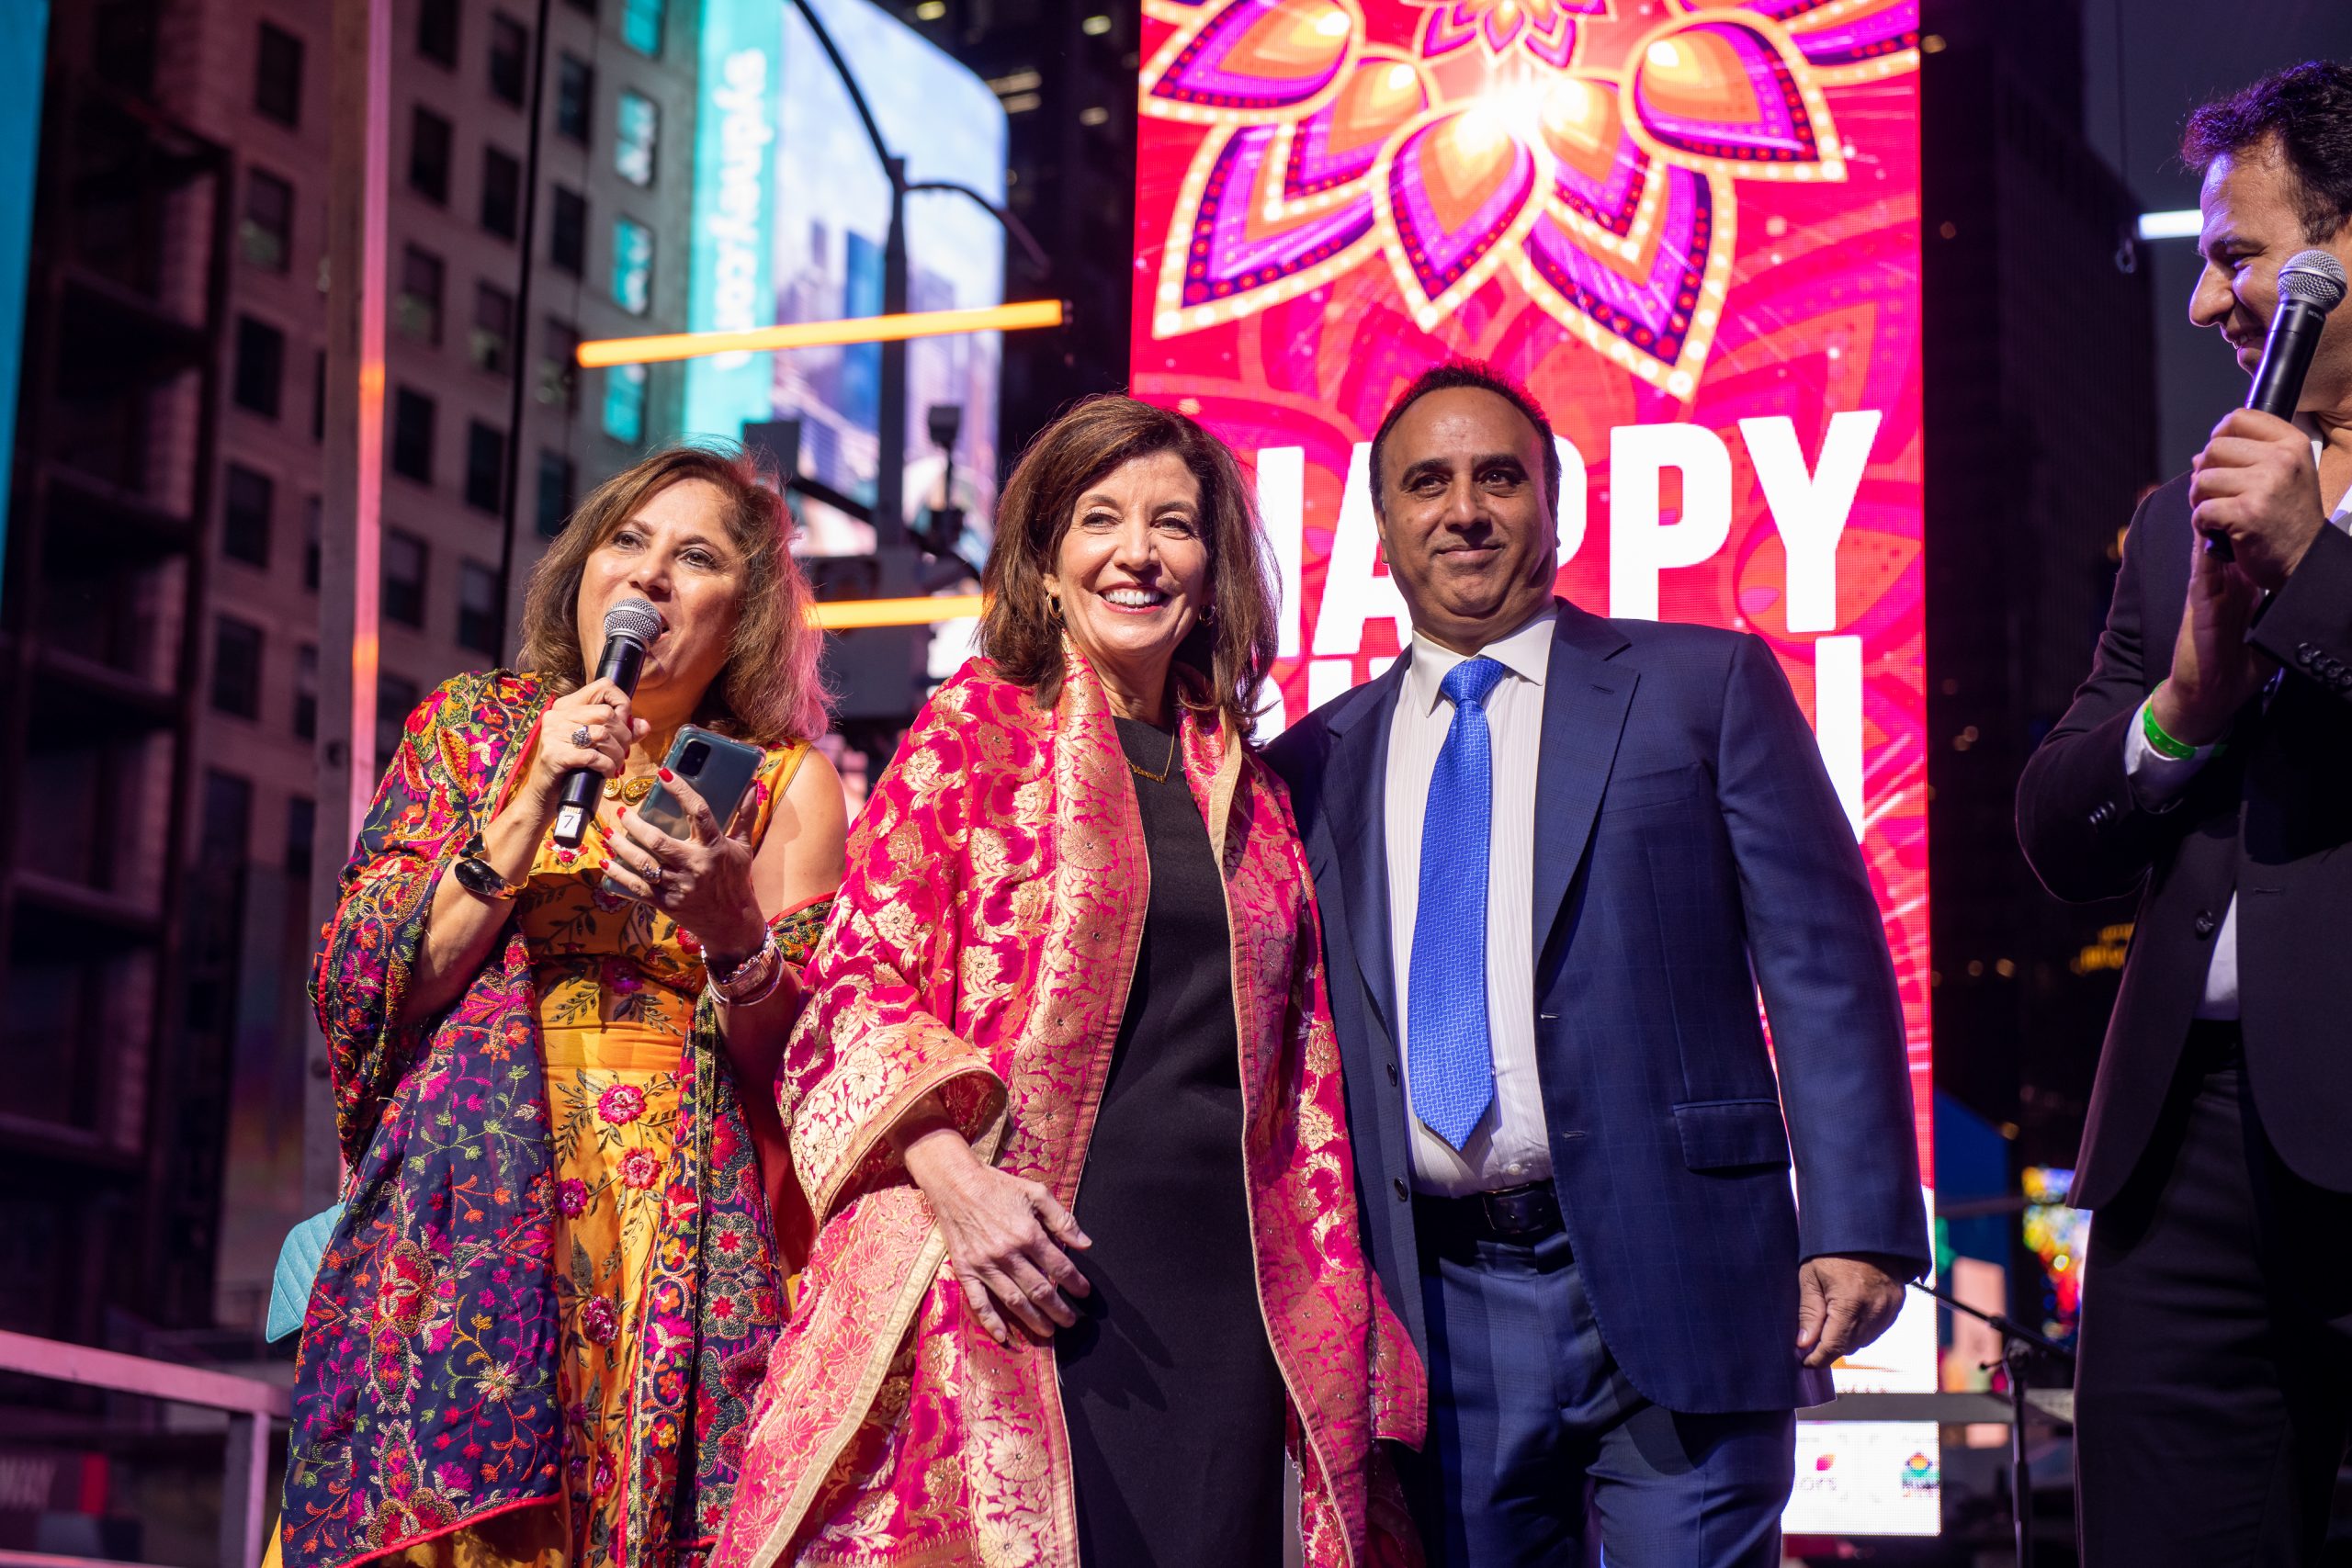 NYS-Governor-Kathleen-Hochul-with-Neeta-Bhasin-Producer-Diwali-at-Times-Square-and-Harry-Singh-Bolla-Bolla-Corp-scaled.jpg